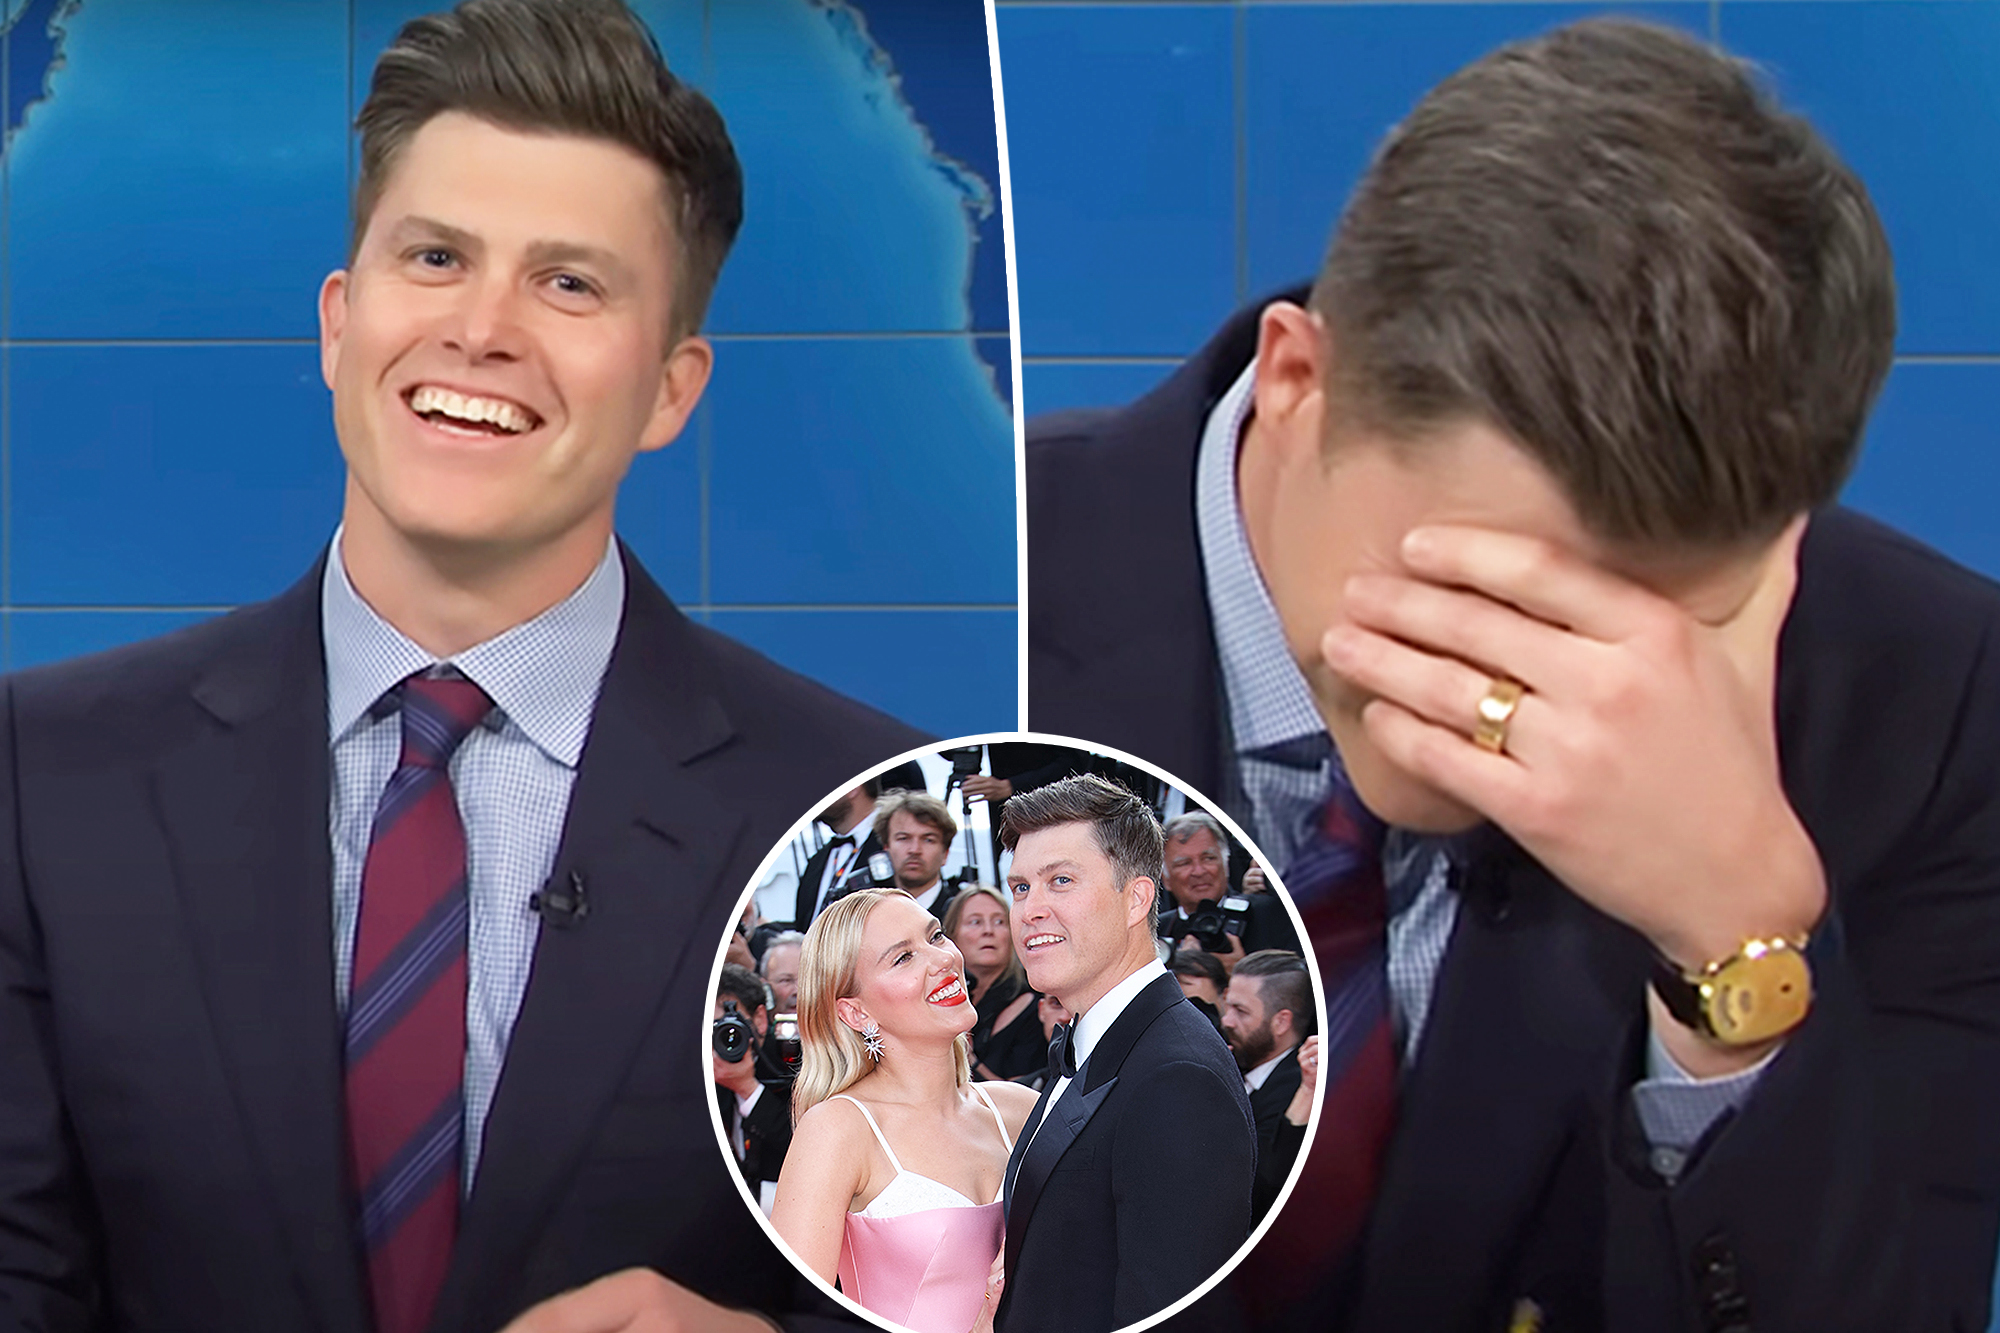 Colin Jost Faces Backlash for Controversial Joke About Scarlett Johansson on 'SNL'